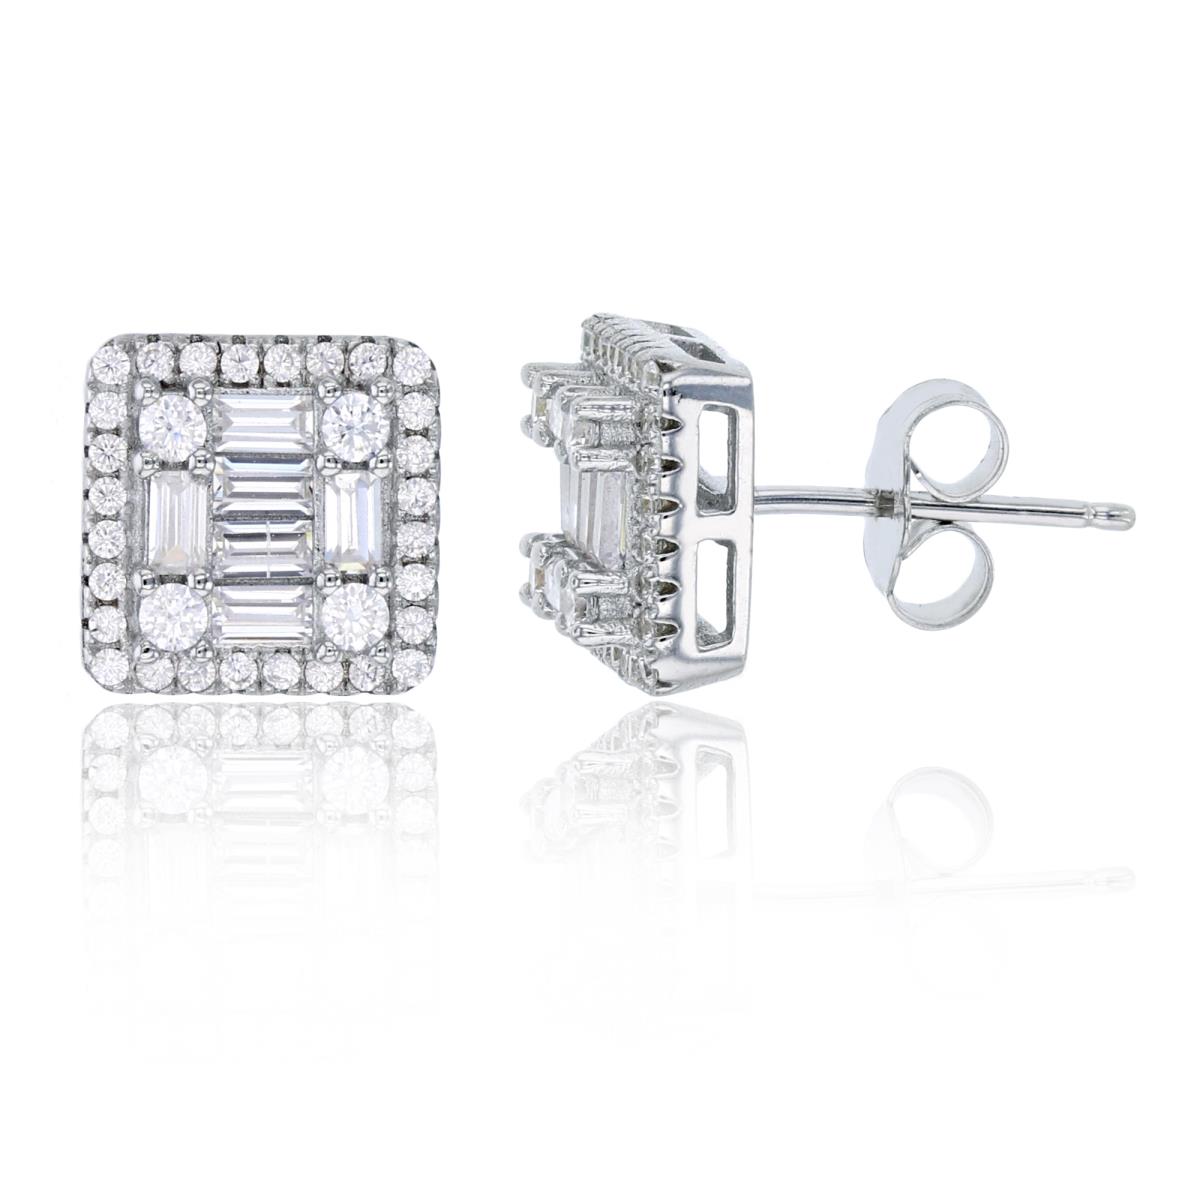 Sterling Silver Rhodium 10x10mm Pave Rd & Baguette CZ Square Stud Earring